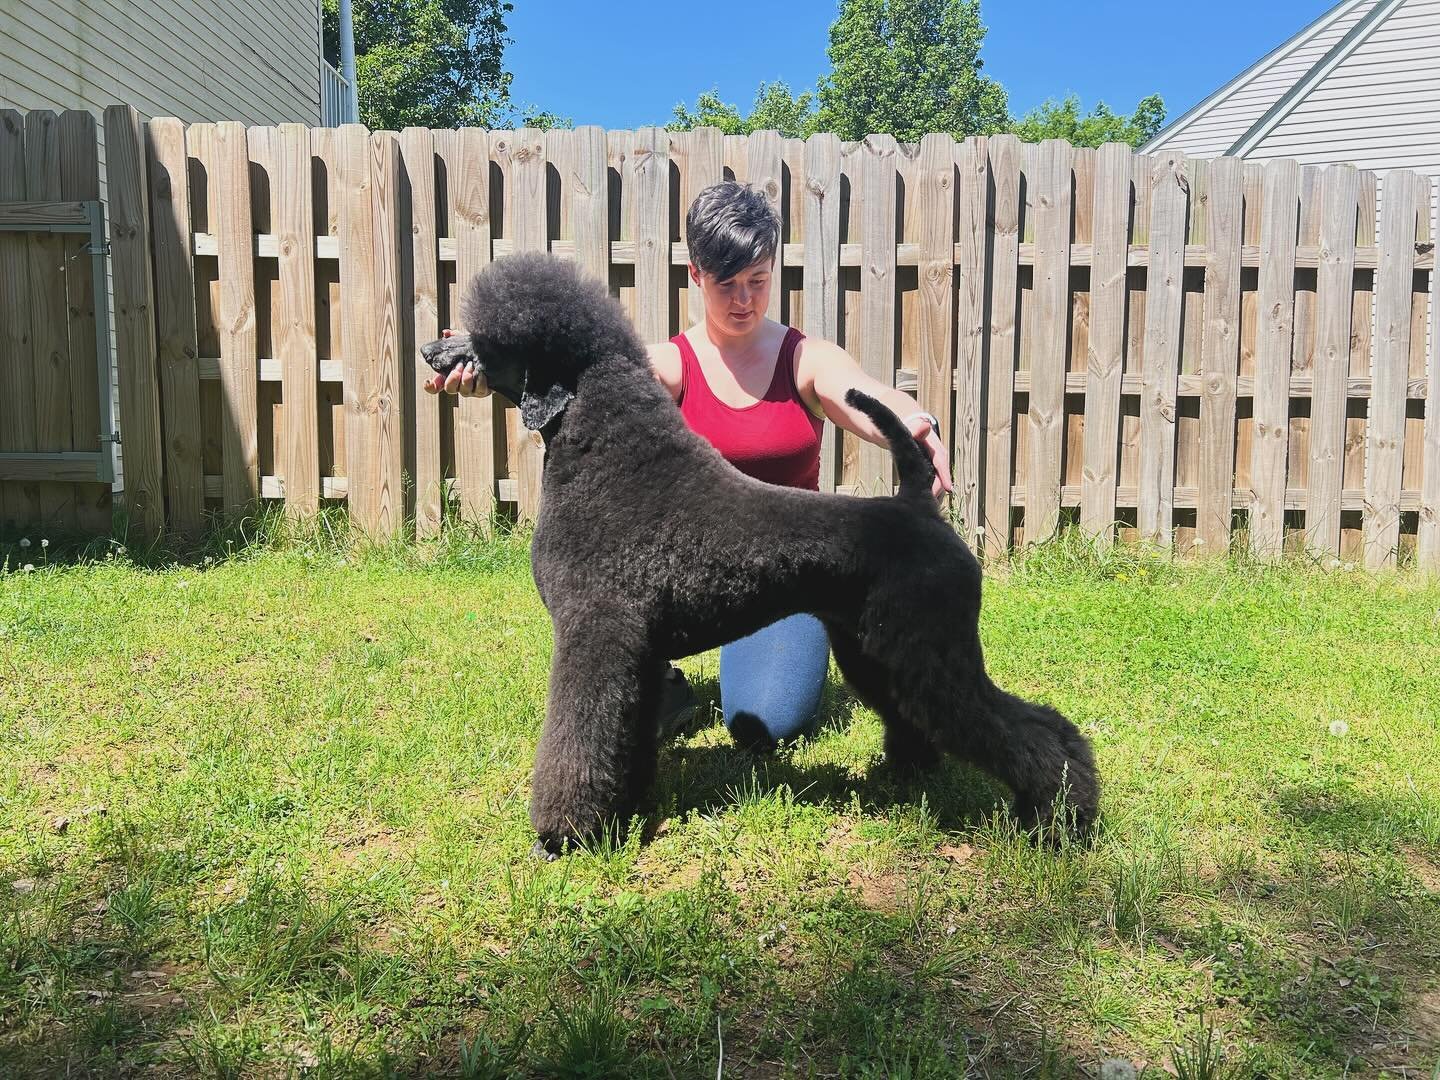 After a 4am start to the day I am now certified through the NDGAA for the non-sporting group and through AKC for curly coat. It&rsquo;s the first step in becoming a national certified master groomer 

#standardpoodle #poodle #ndgaa #nonsportinggroup 